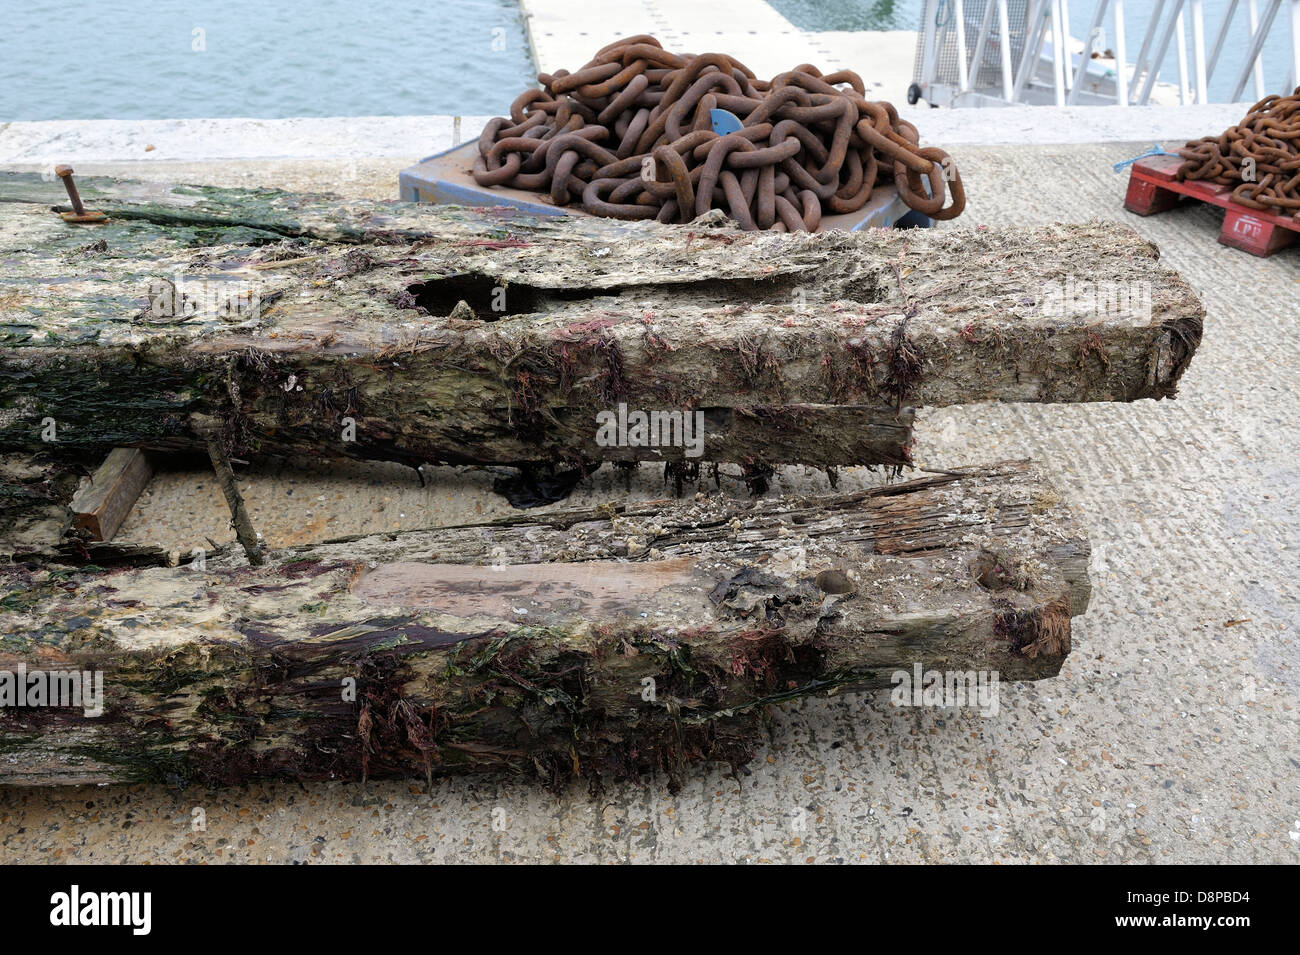 rotting pier timber piles removed from swanage pier by contractors jenkins marine Dorset Engand uk Stock Photo